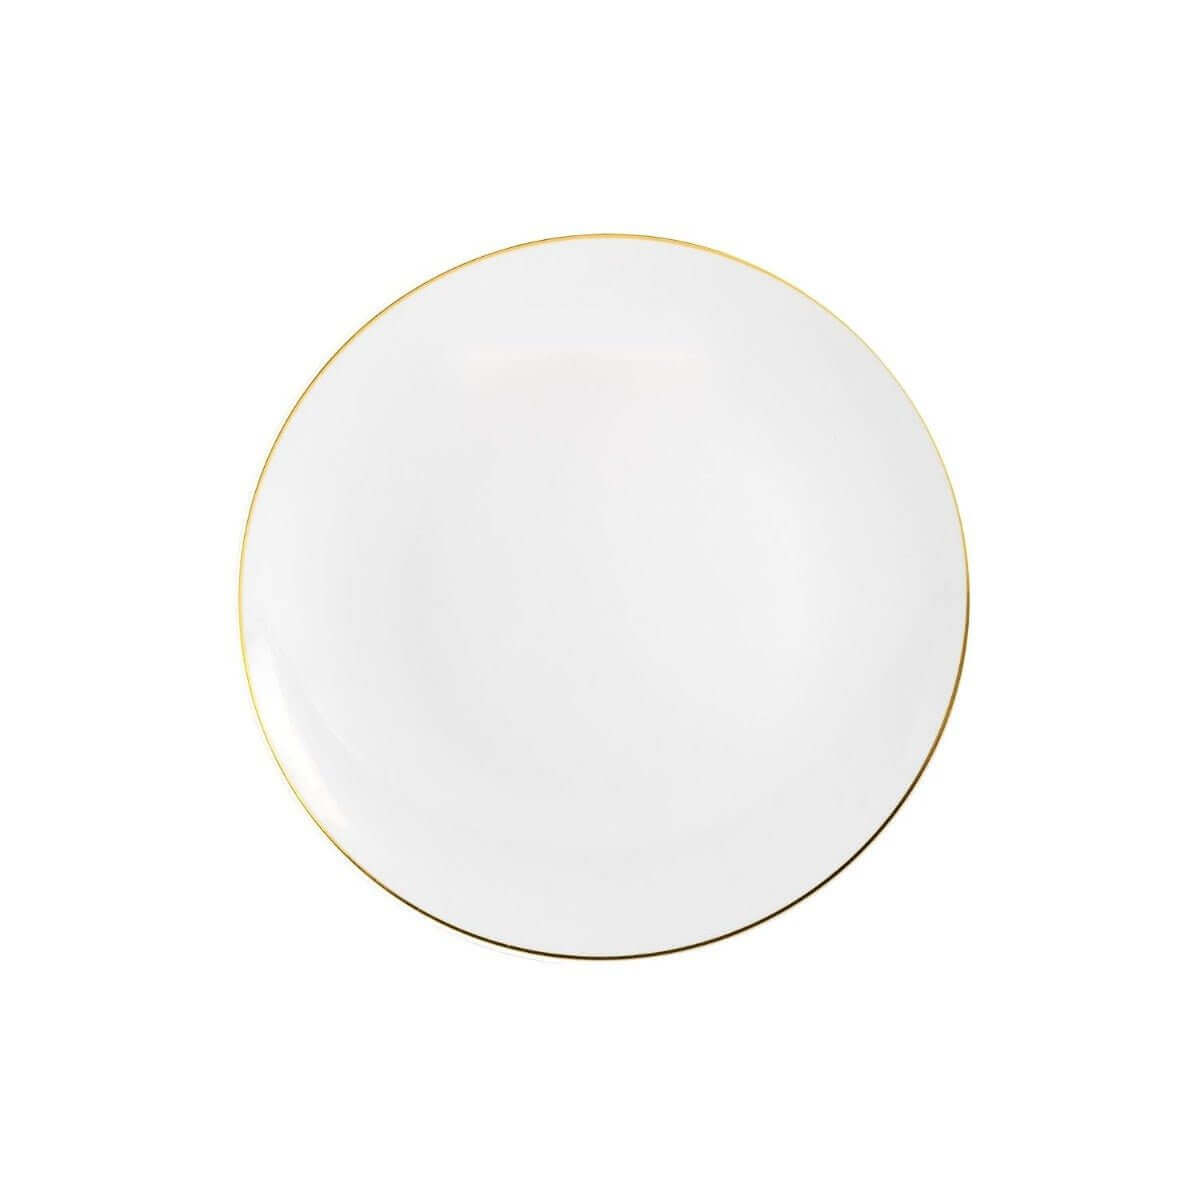 140 Piece White & Gold Rim Combo Set | Serves 20 Guests - Yom Tov Settings